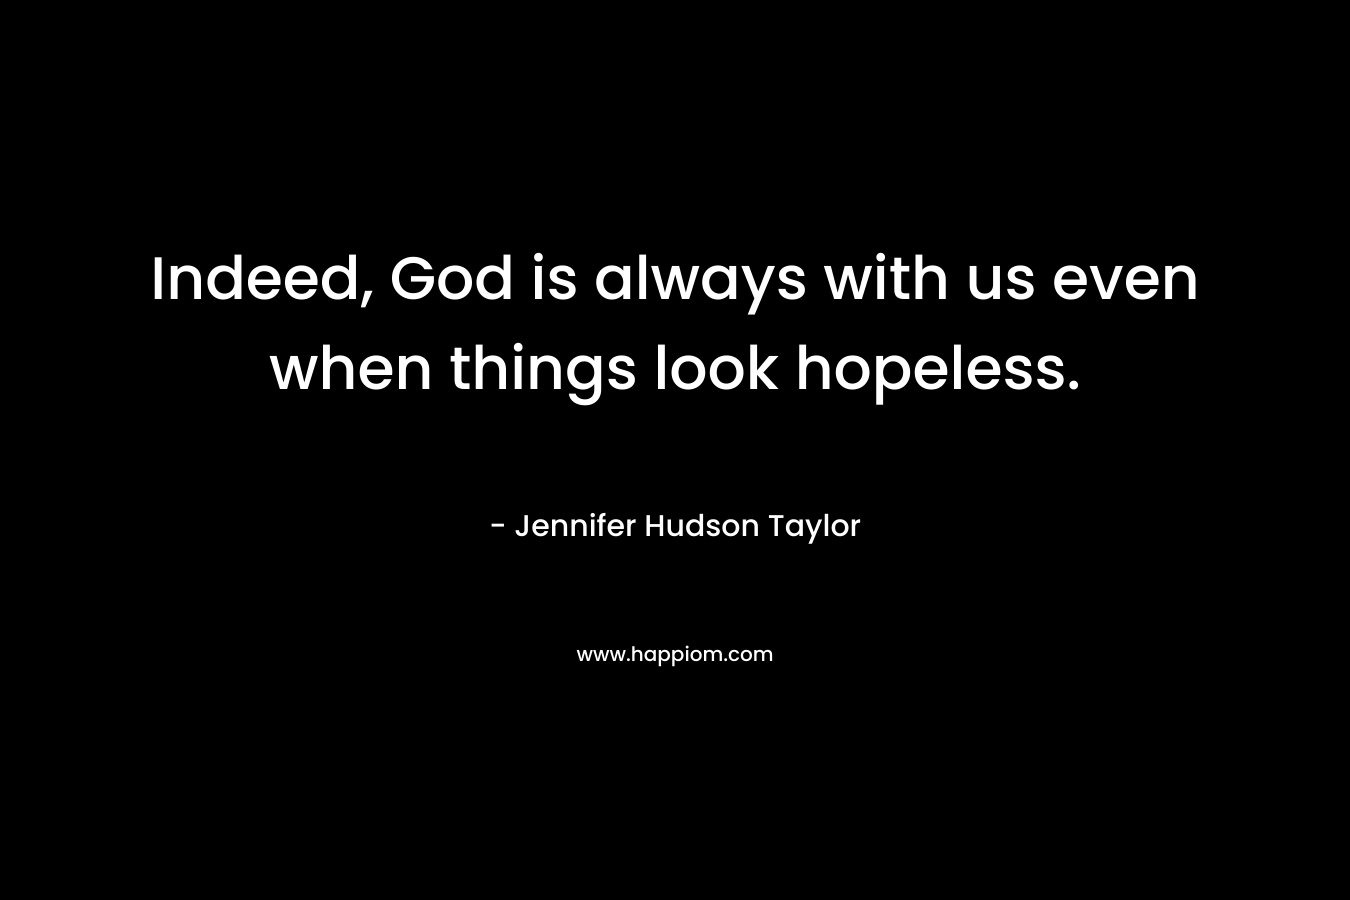 Indeed, God is always with us even when things look hopeless.